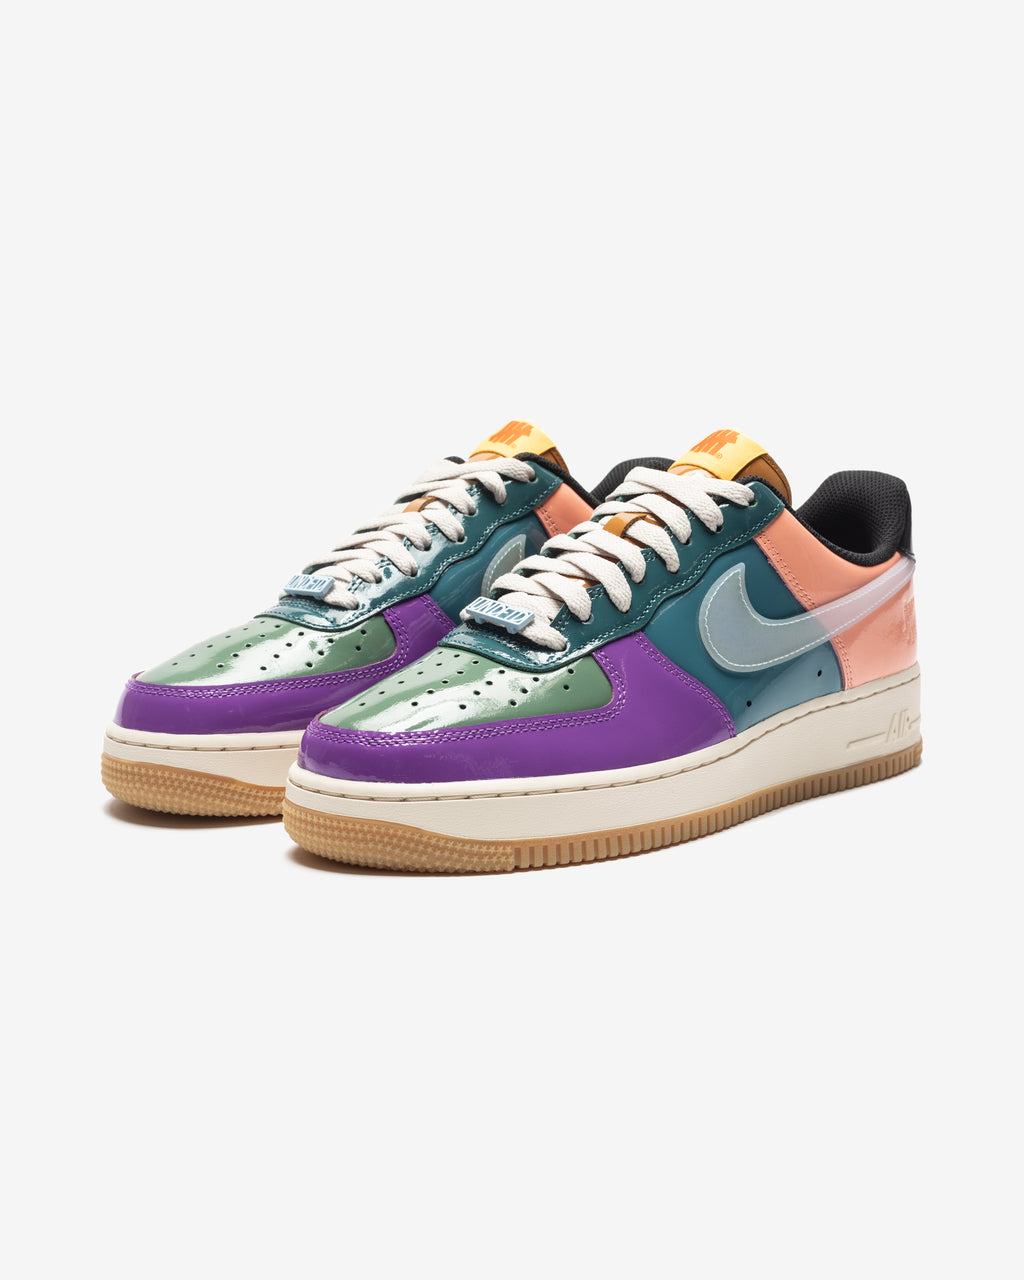 UNDEFEATED x NIKE AIR FORCE 1 LOW SP – Undefeated